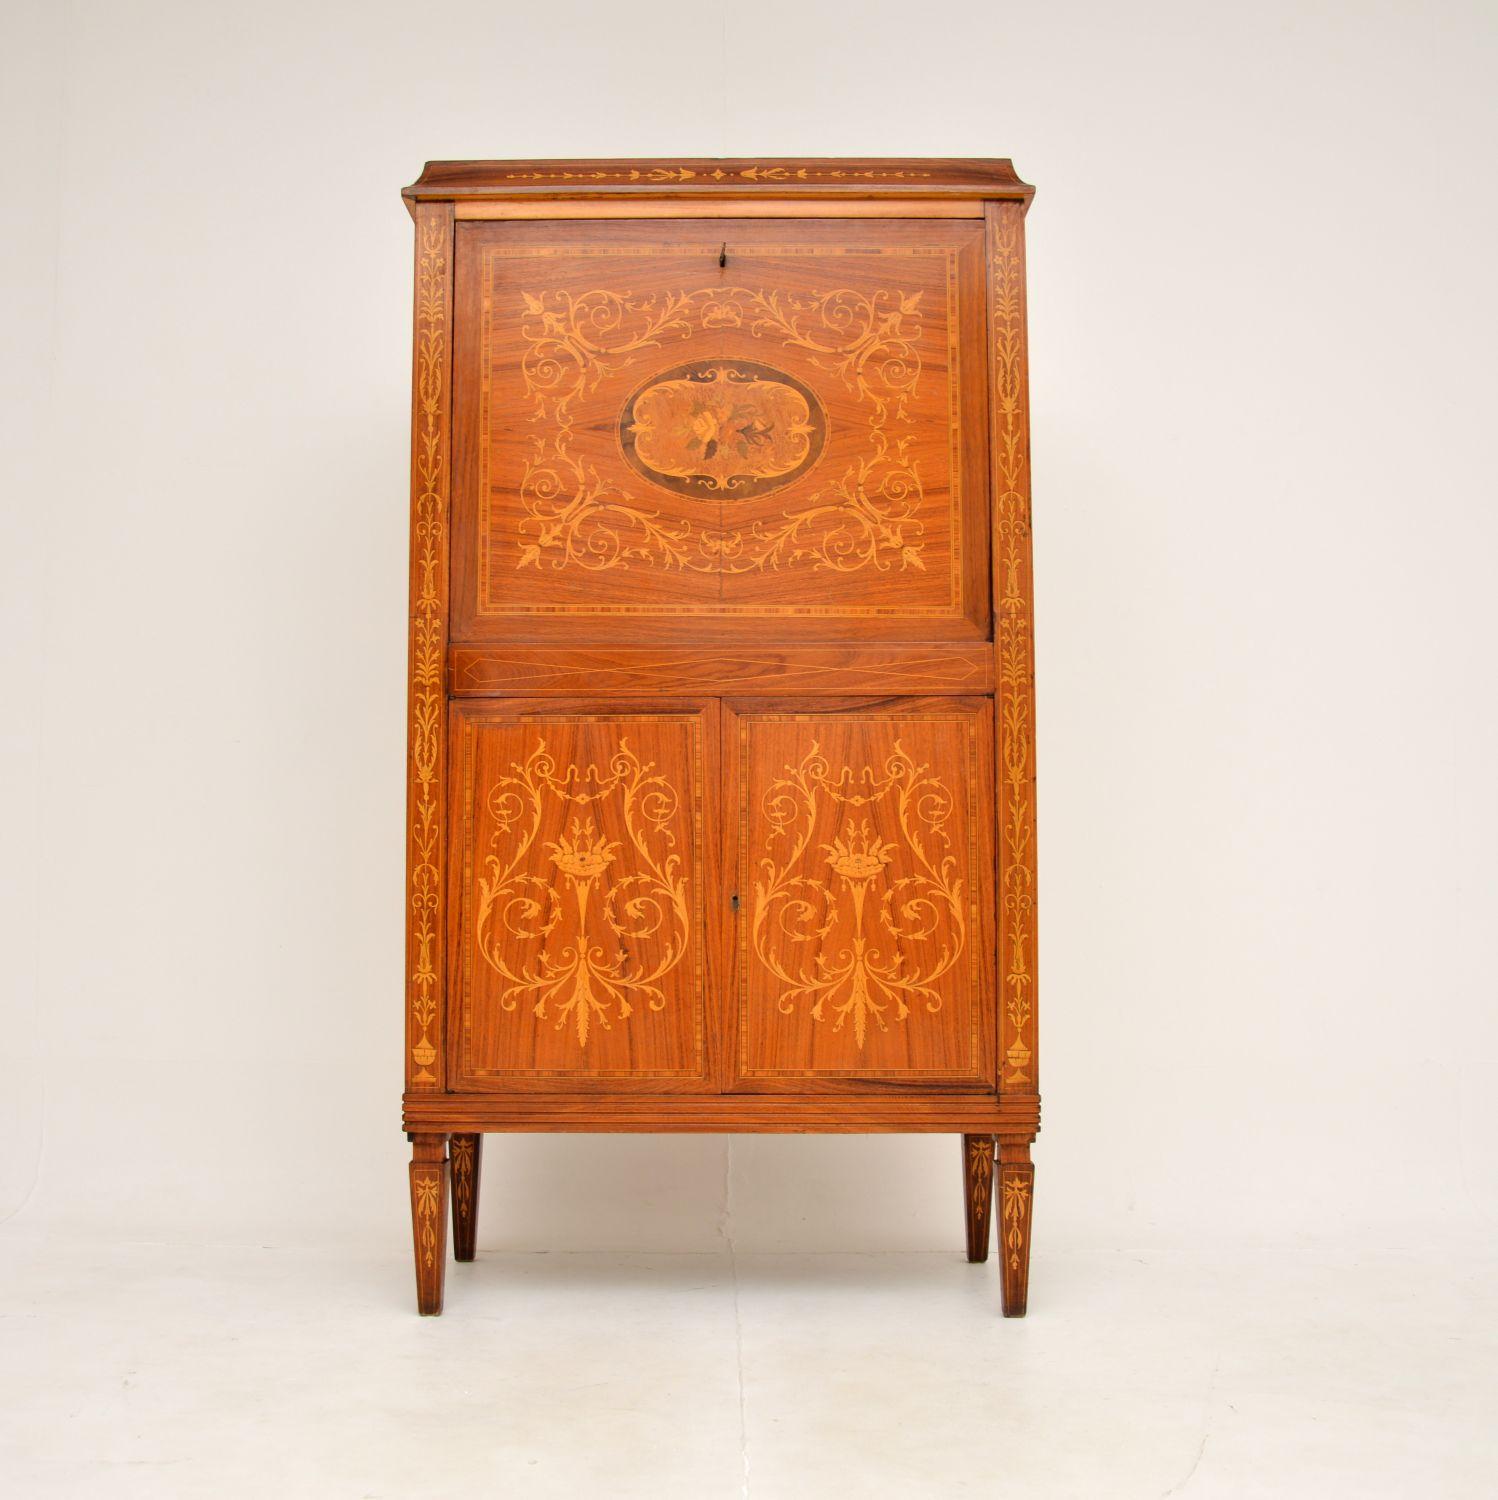 A superb antique Italian inlaid drinks cabinet in various woods. This dates from around the 1920’s.

It is of exceptional quality, with incredibly detail throughout. Even the inside surface of the drop down flap and insides of the lower doors have